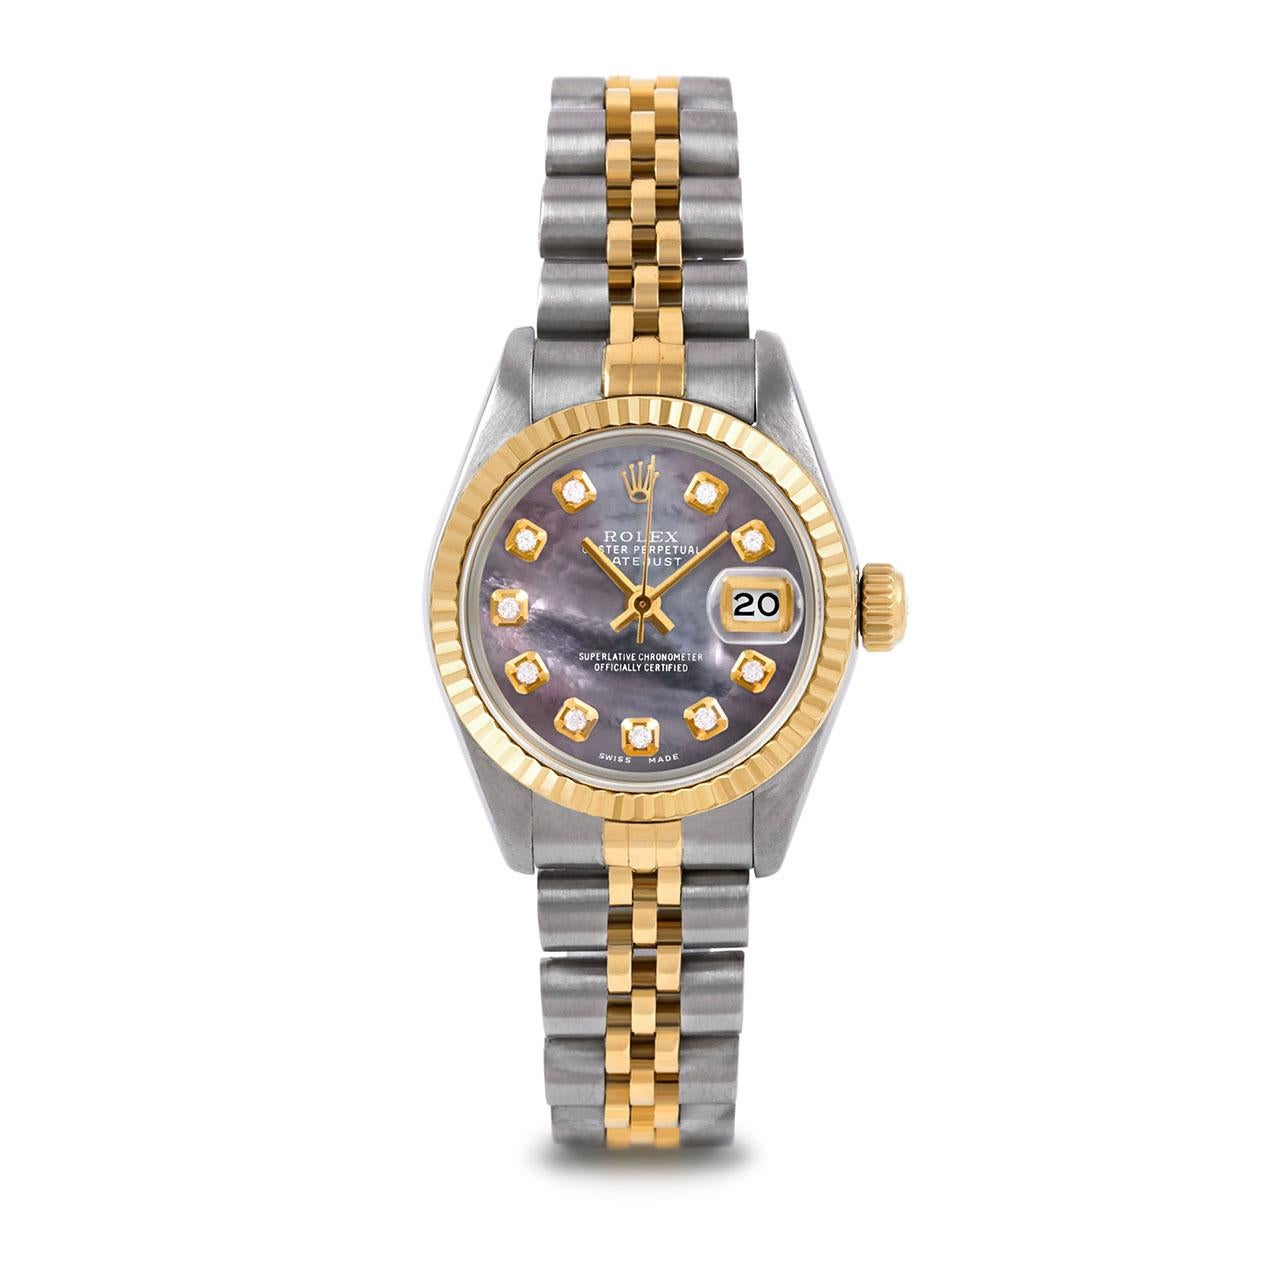 Pre-Owned Rolex 6917 Ladies 26mm Two Tone Datejust Watch, Custom Black Mother of Pearl Diamond Dial & Fluted Bezel on Rolex 14K Yellow Gold And Stainless Steel Jubilee Band.   

SKU 6917-TT-BMOP-DIA-AM-FLT-JBL


Brand/Model:        Rolex